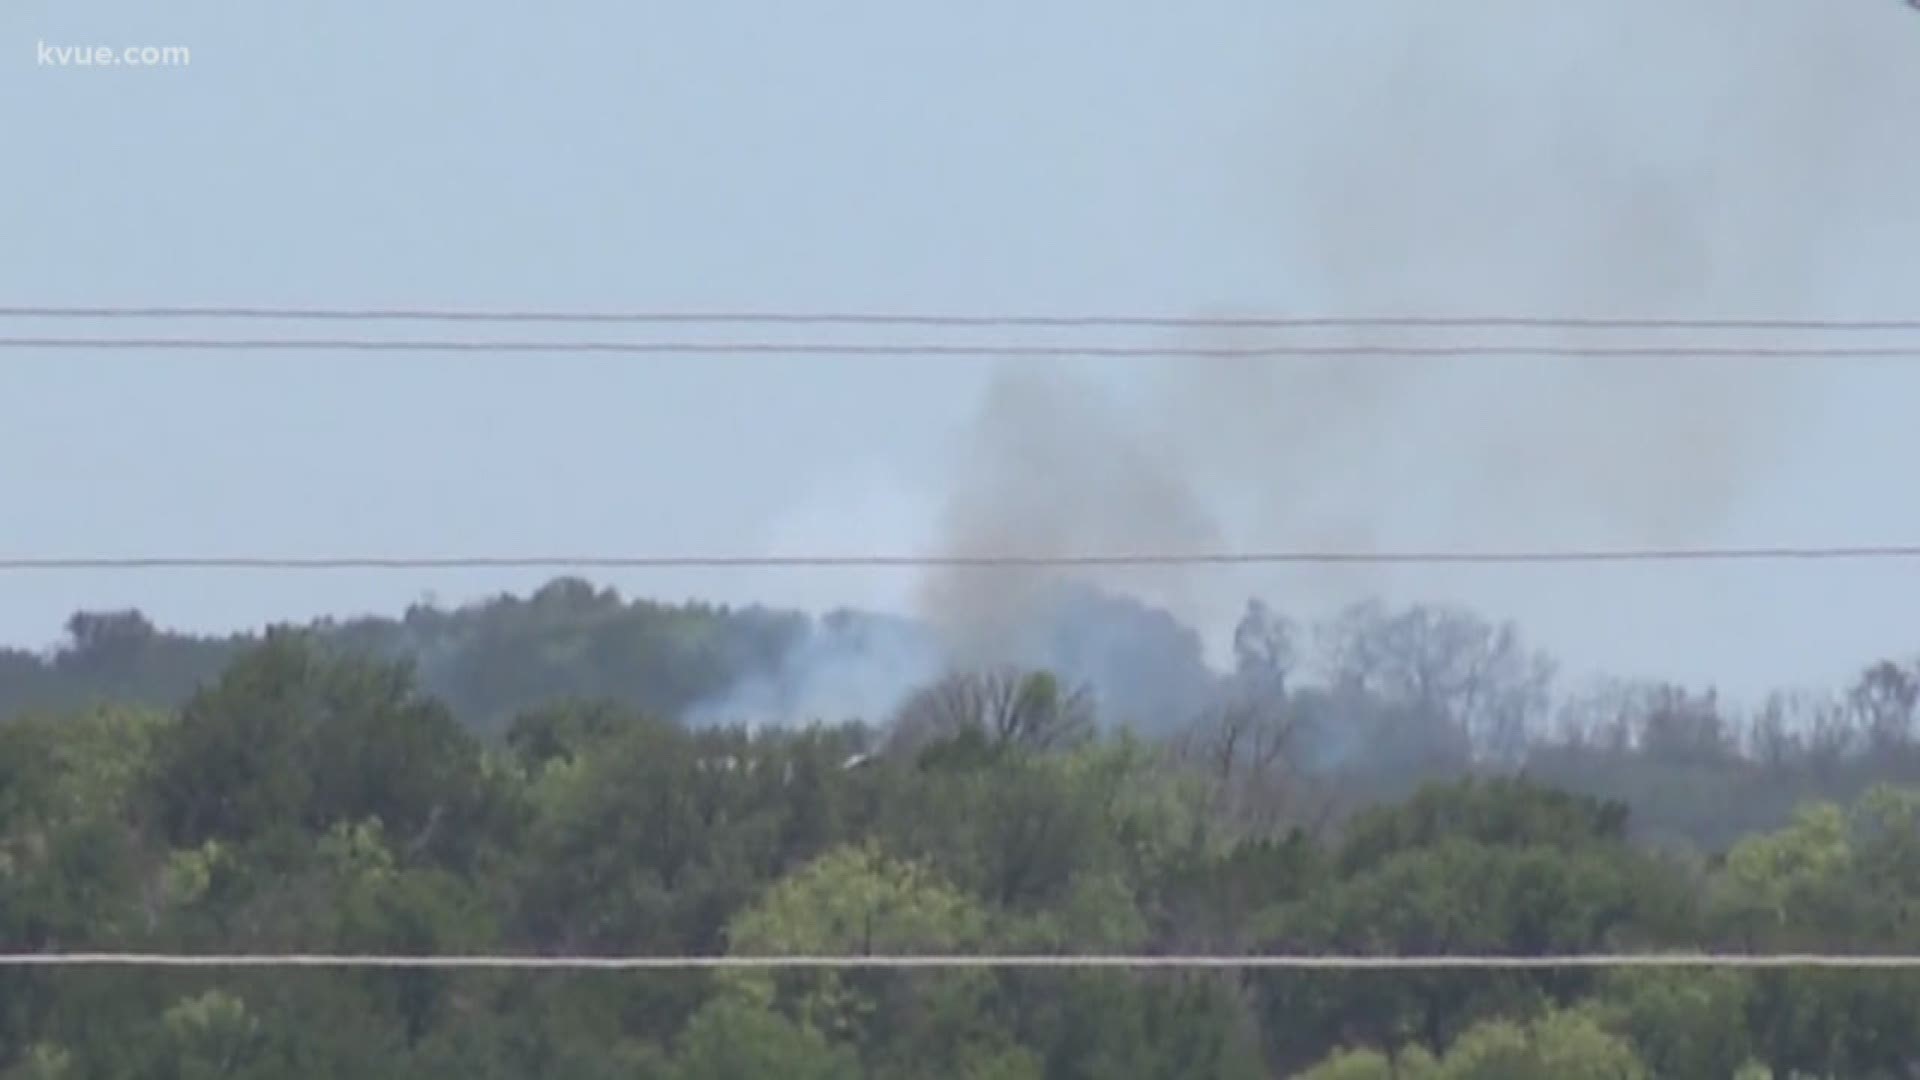 The Texas A&M Forest Service says the so-called 3-0-8 fire is burning 12-hundred acres and is 80-percent contained.